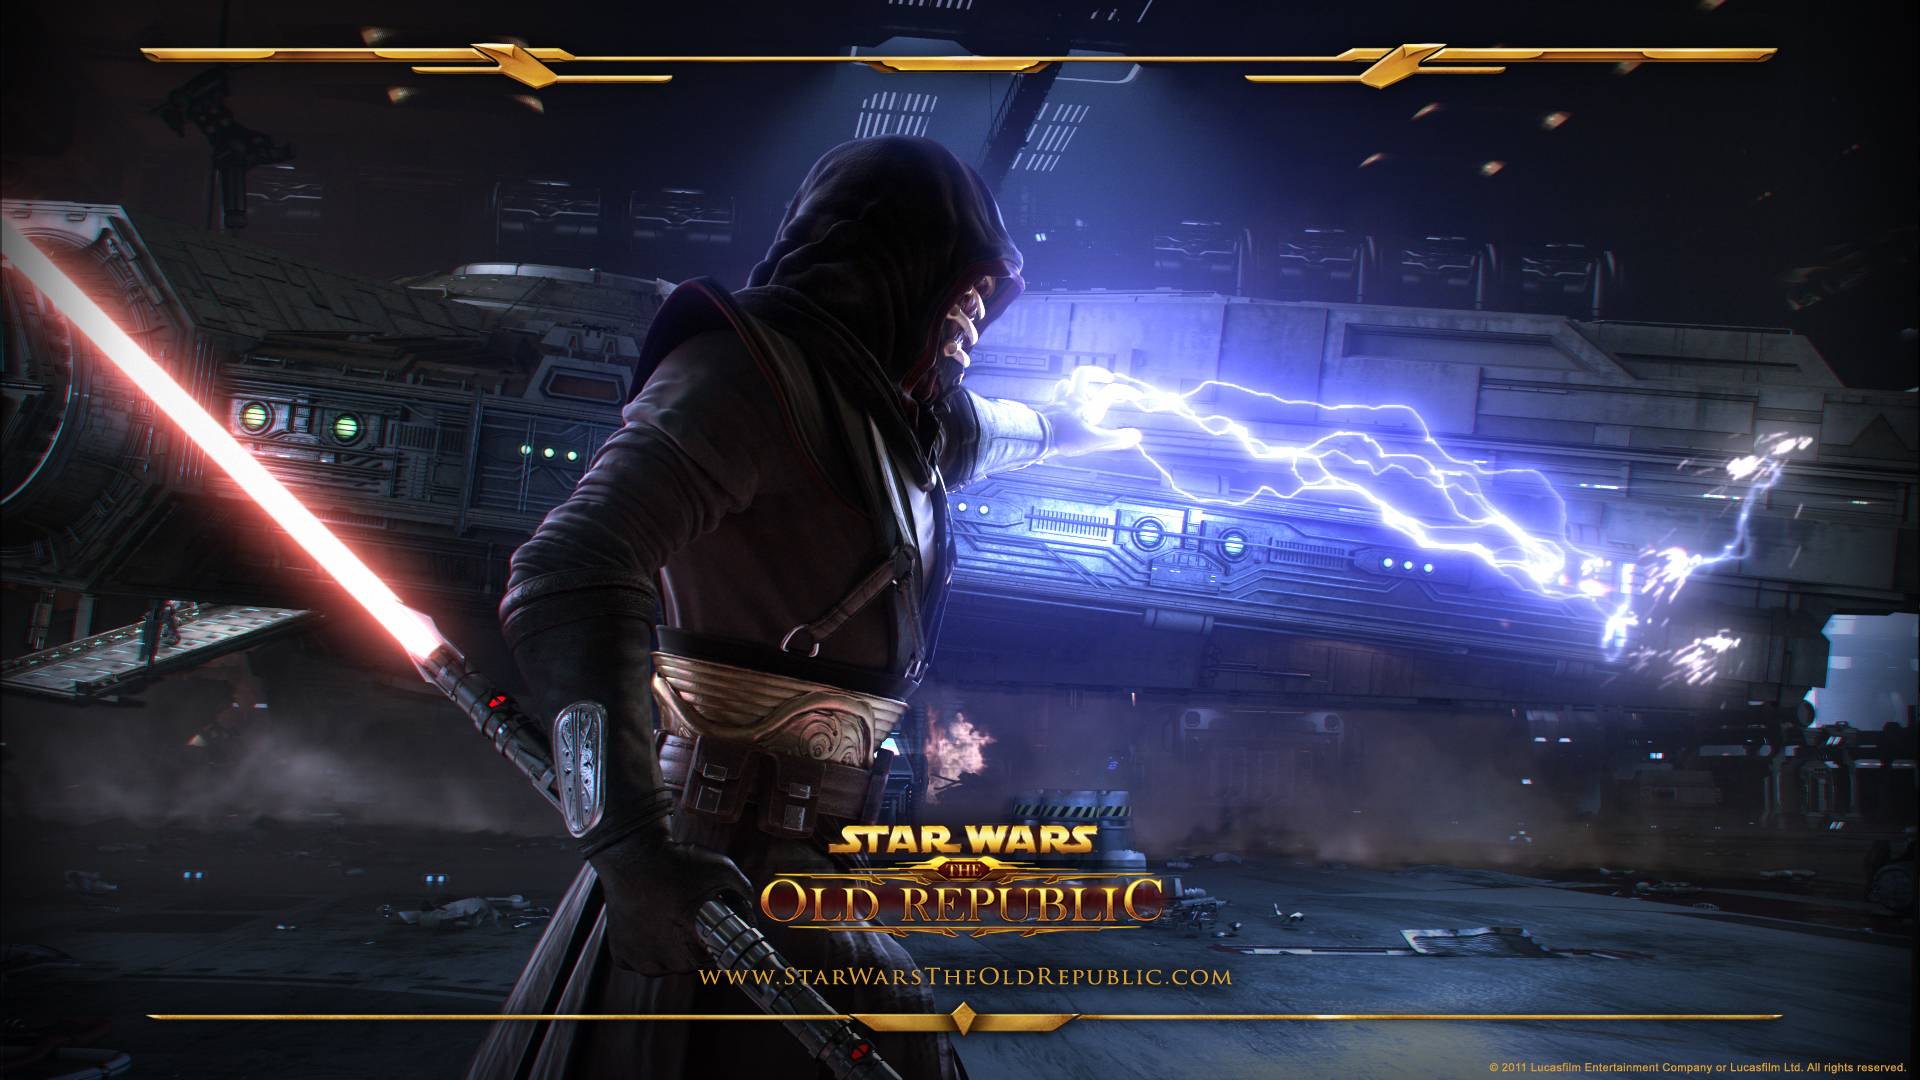 Swtor Wallpapers 1920x1080